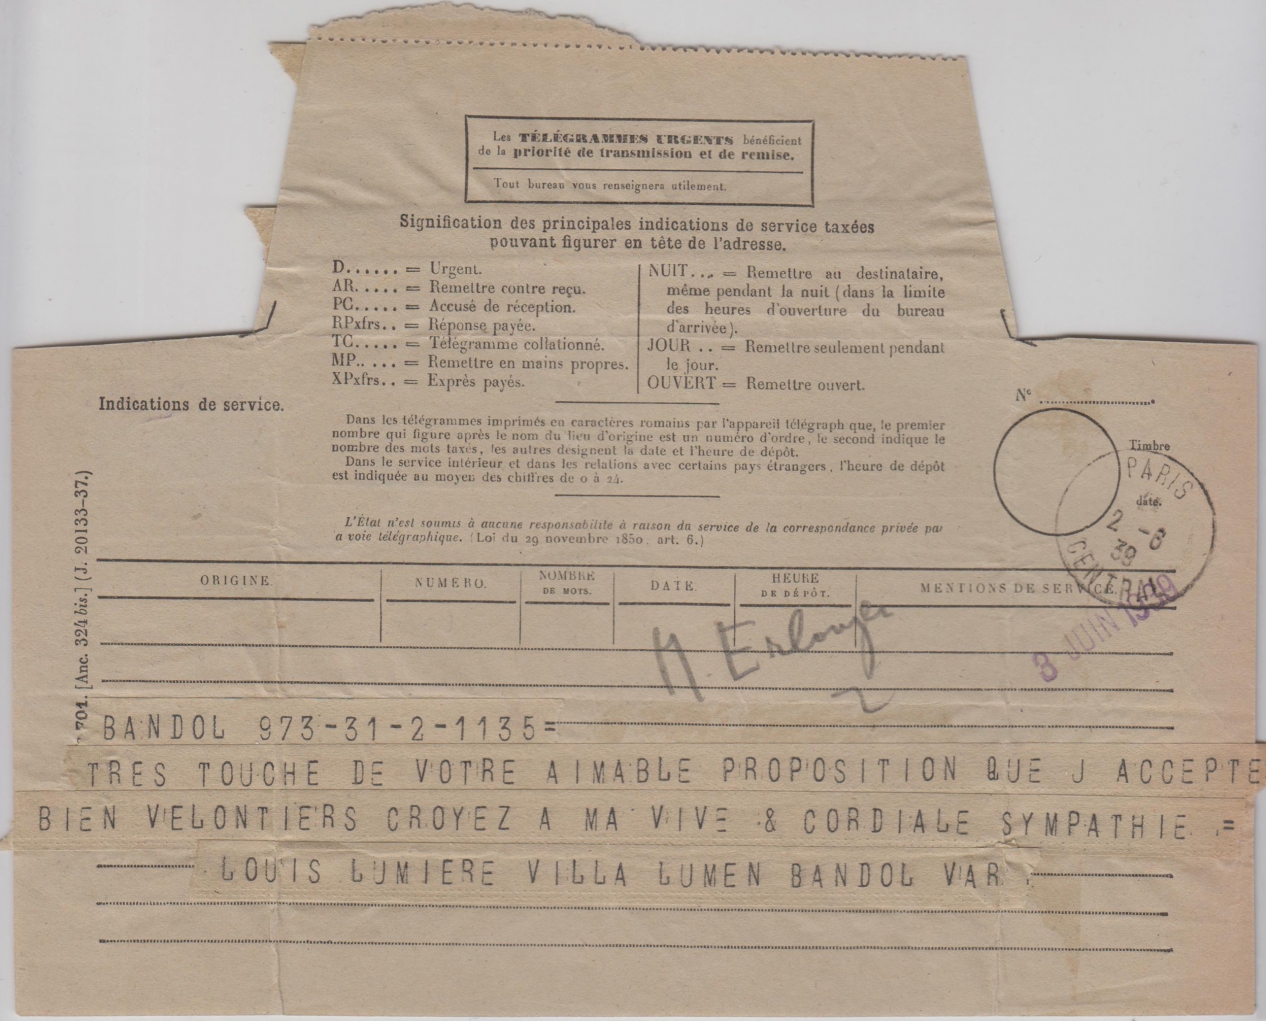 Telegram from Louis Lumière accepting the honorary Presidency of the Festival, 2 June 1939.